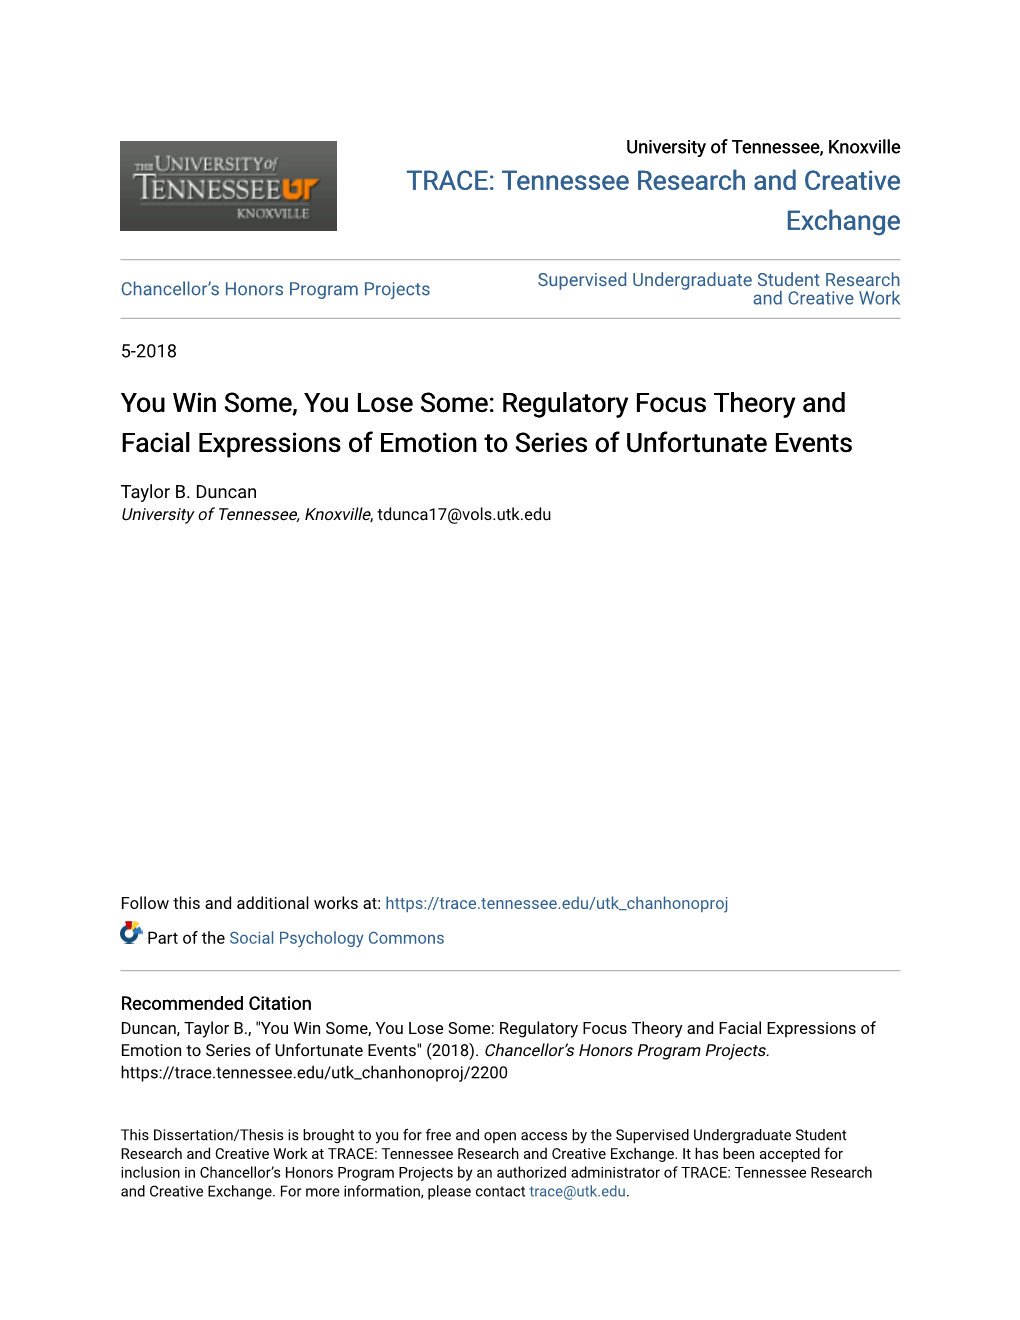 You Win Some, You Lose Some: Regulatory Focus Theory and Facial Expressions of Emotion to Series of Unfortunate Events